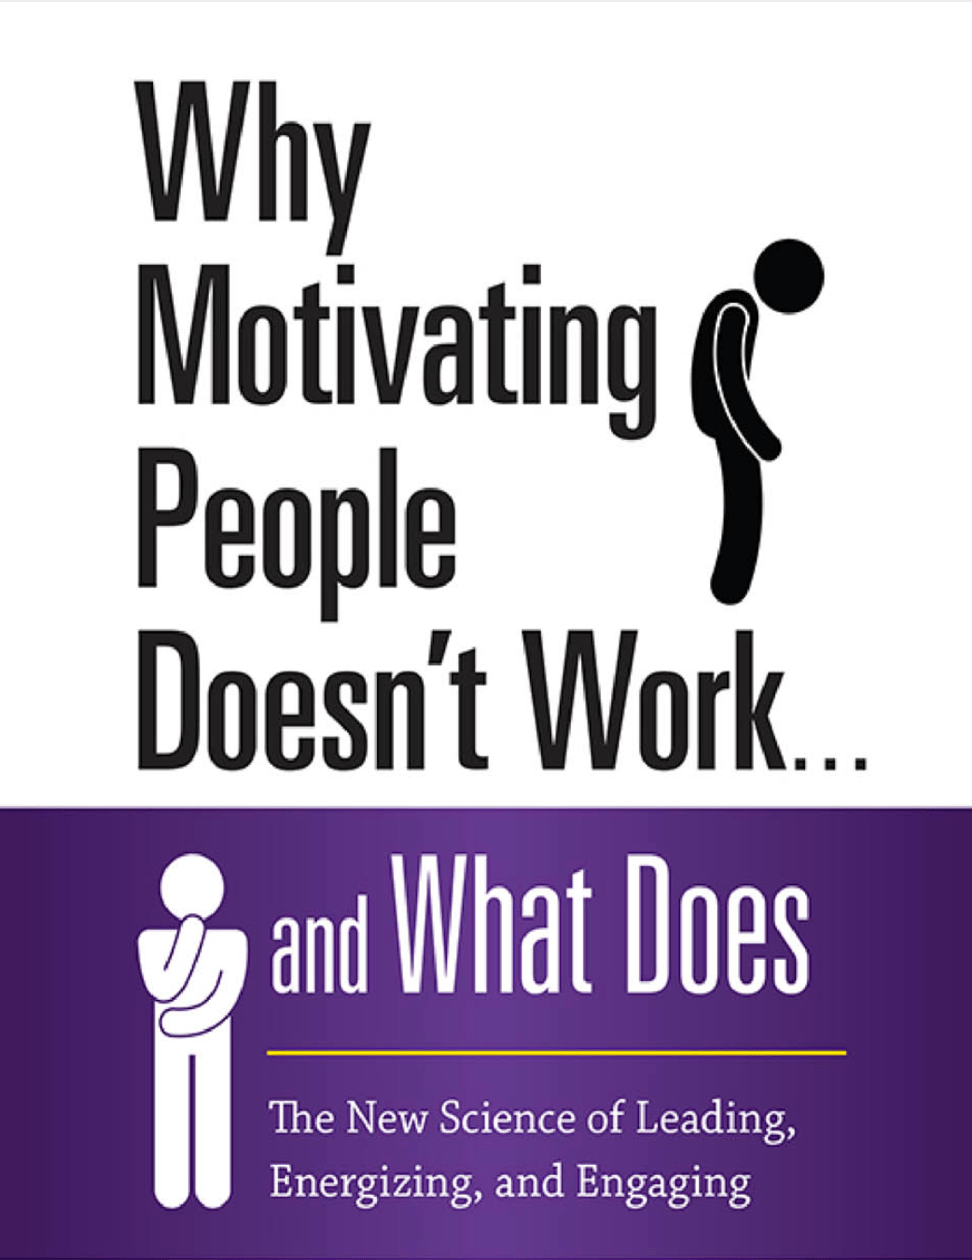 Why Motivating People Doesn’t Work...And What Does book